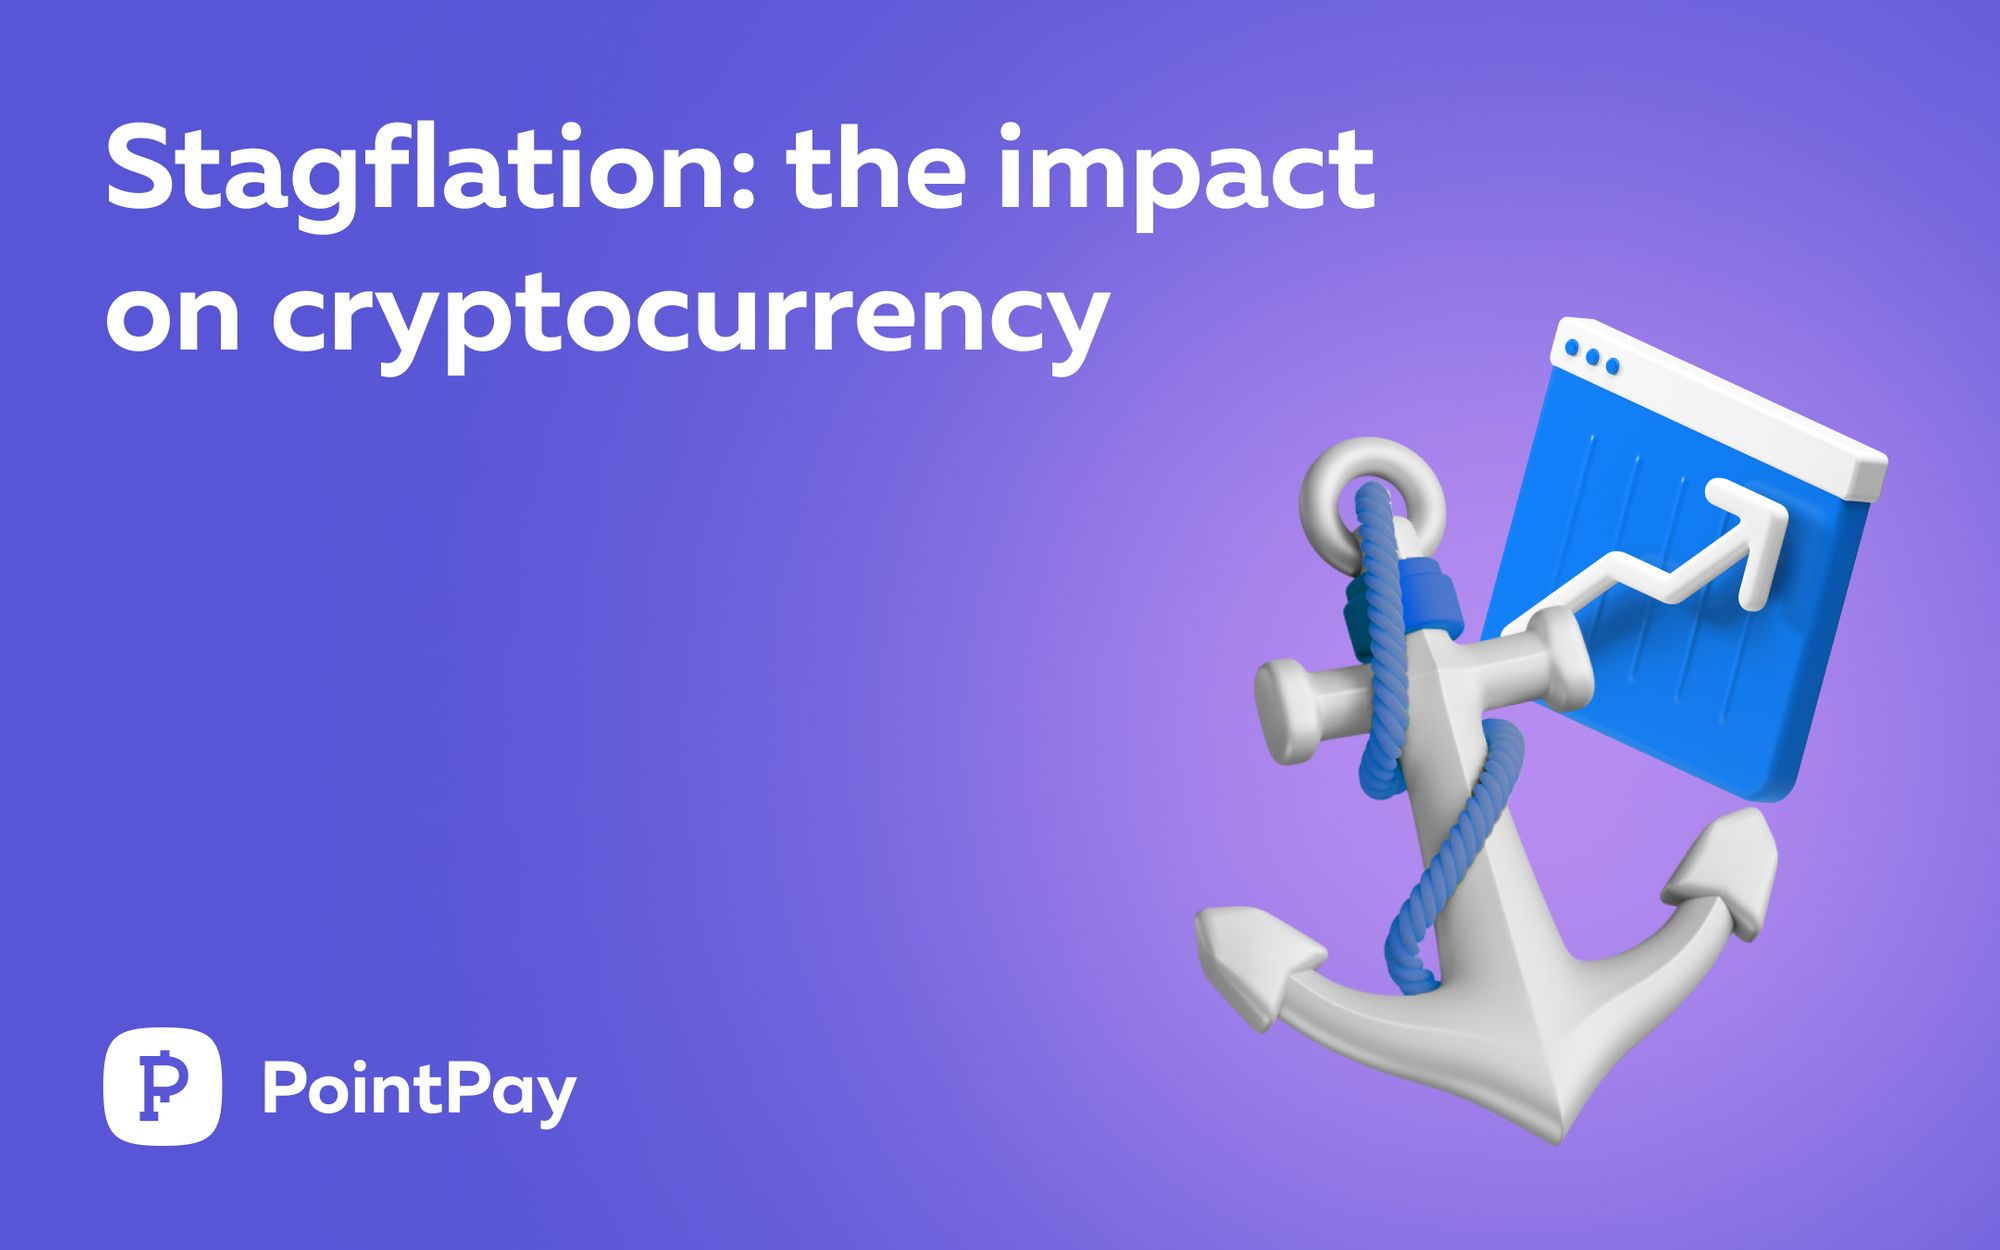 The impact of stagflation on the cryptocurrency market